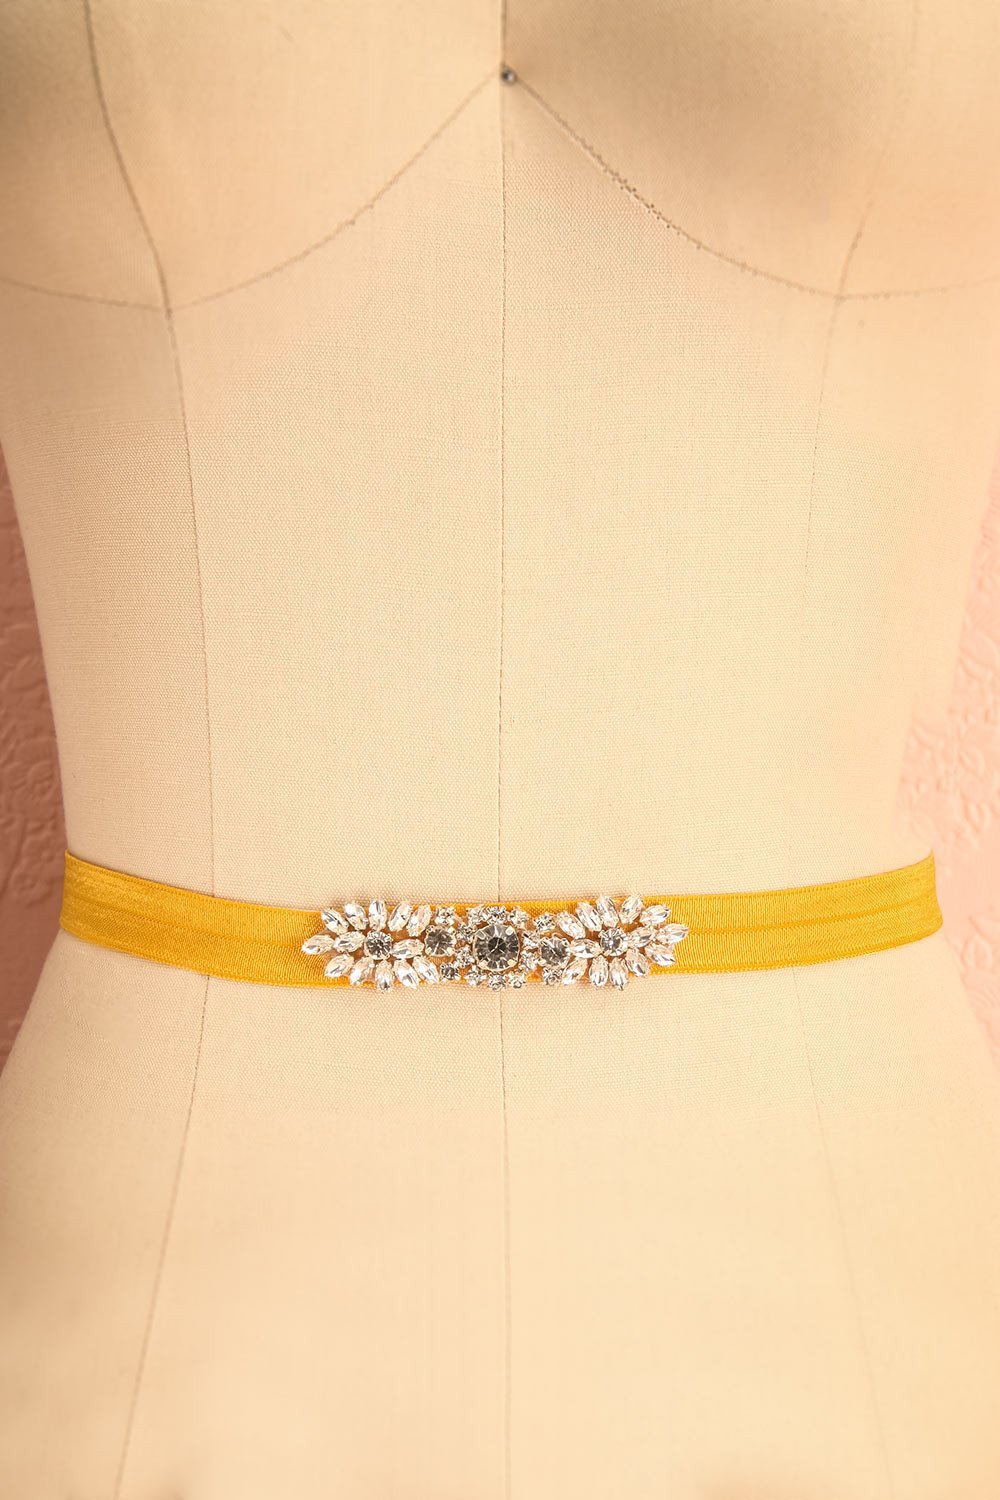 Calathéa Moutarde - Yellow belt with a crystal ornament 3